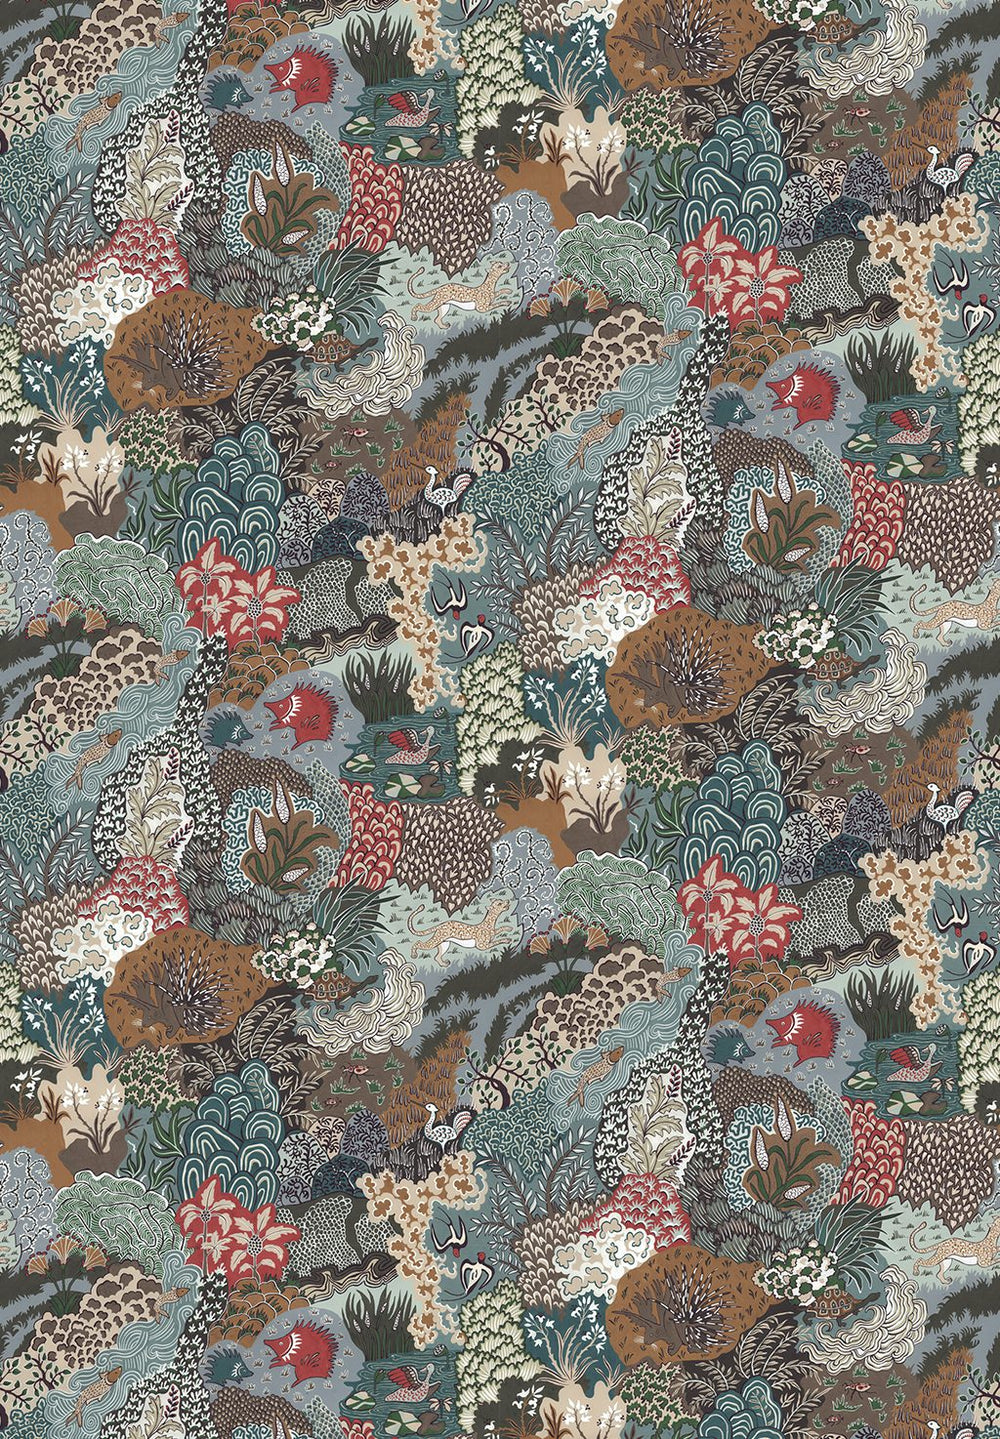 JMW-101901-Whimsical-Clumps-Multi-Room-josephine-munsey-wallpapers-new-multi-animal-floral-printed-british-artisan